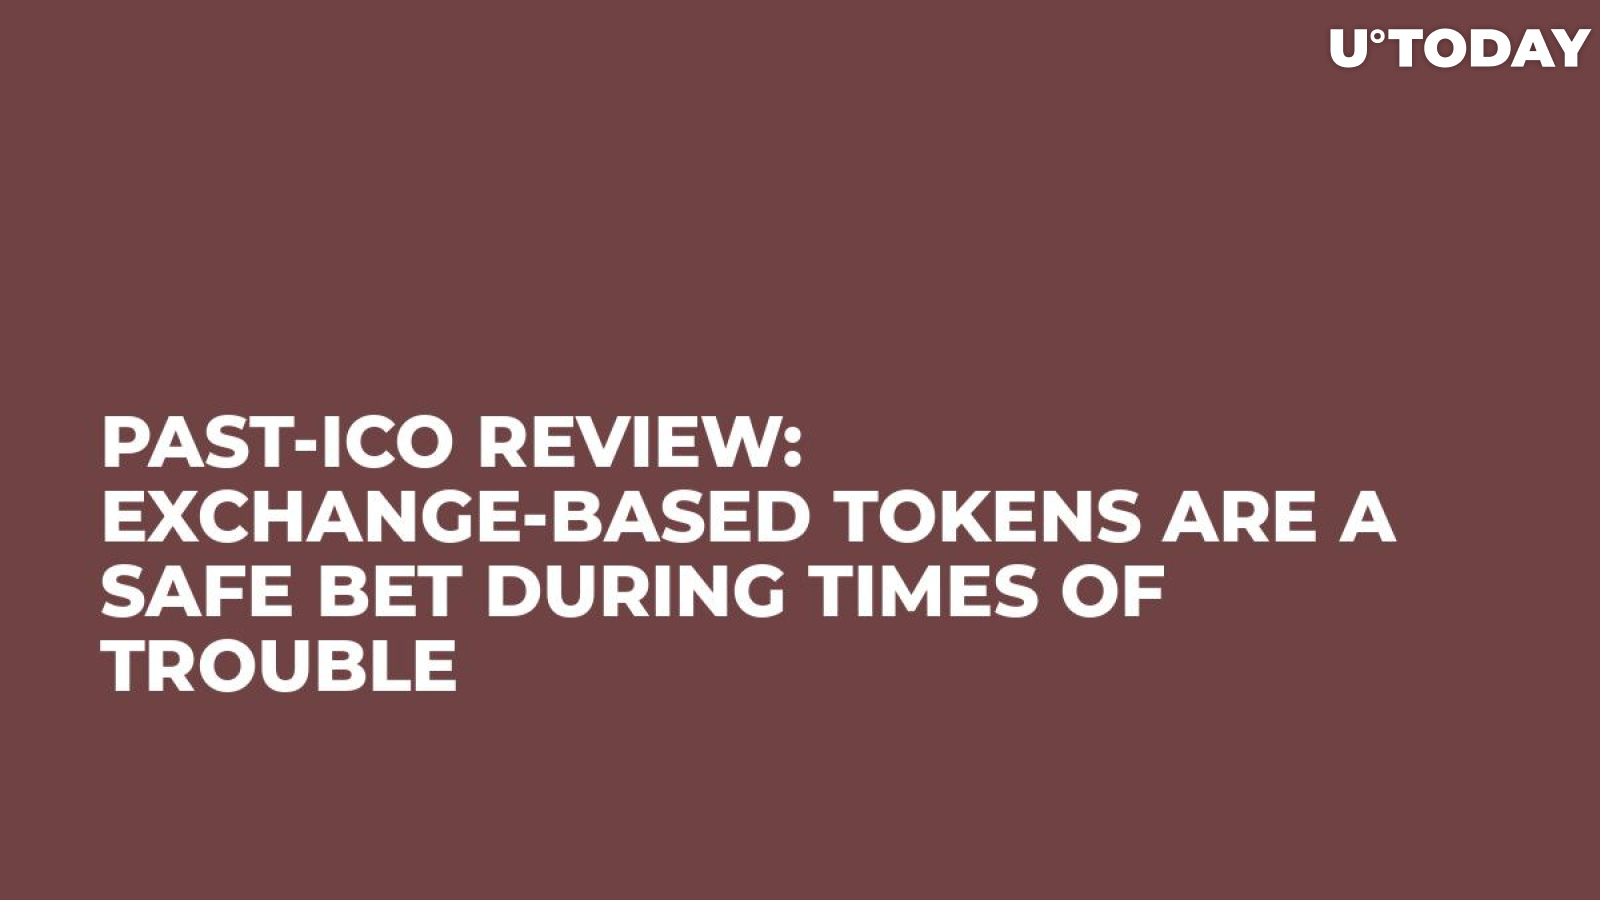 Past-ICO Review: Exchange-Based Tokens Are a Safe Bet During Times Of Trouble